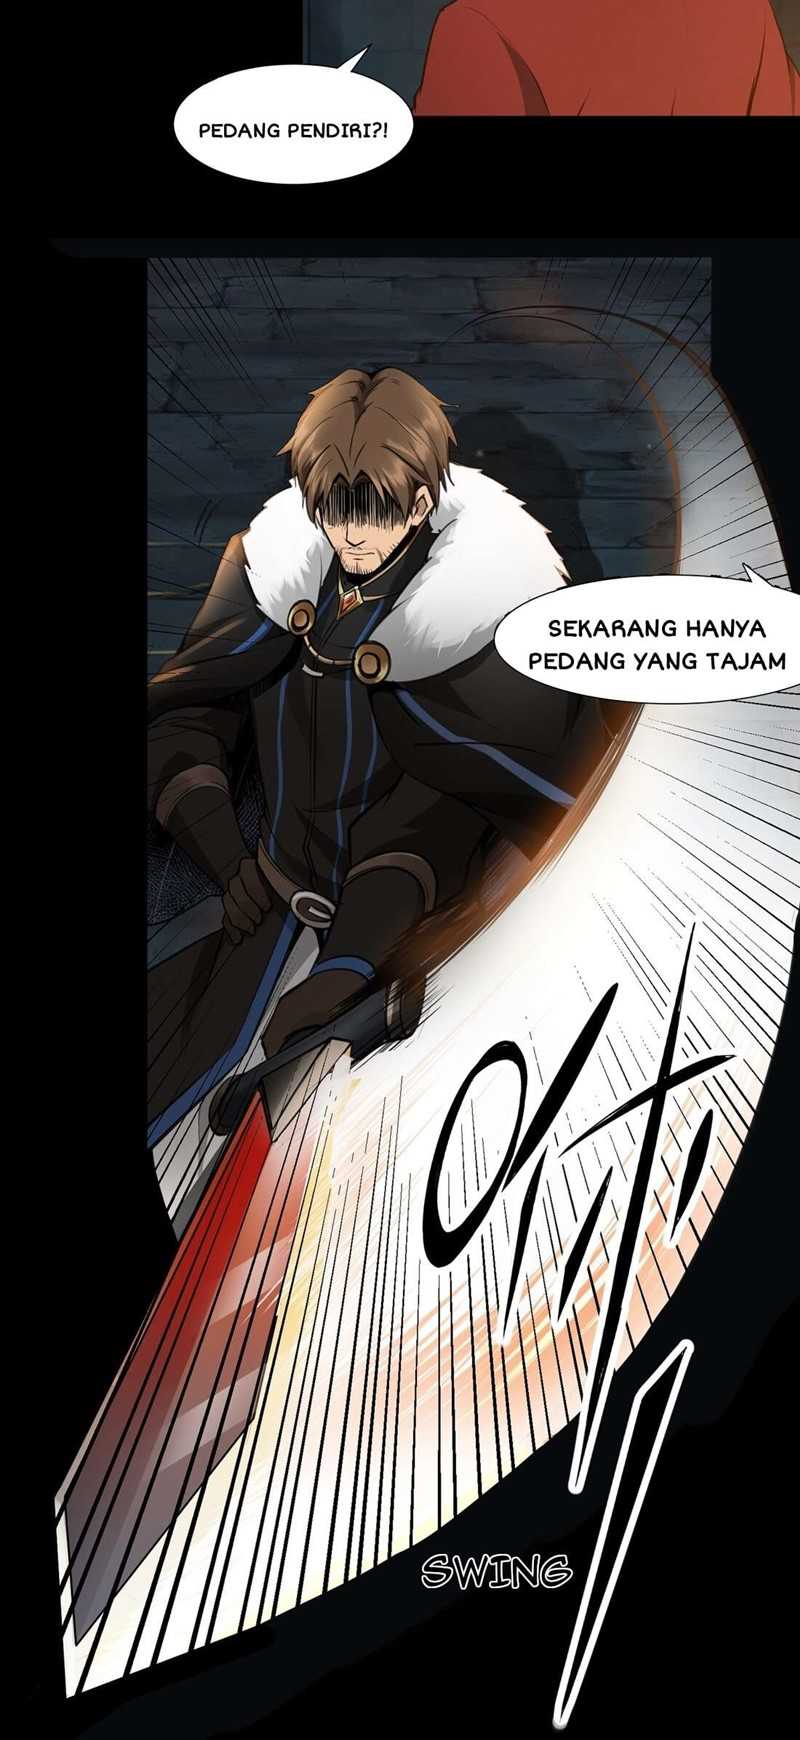 The Sword of Dawn Chapter 04